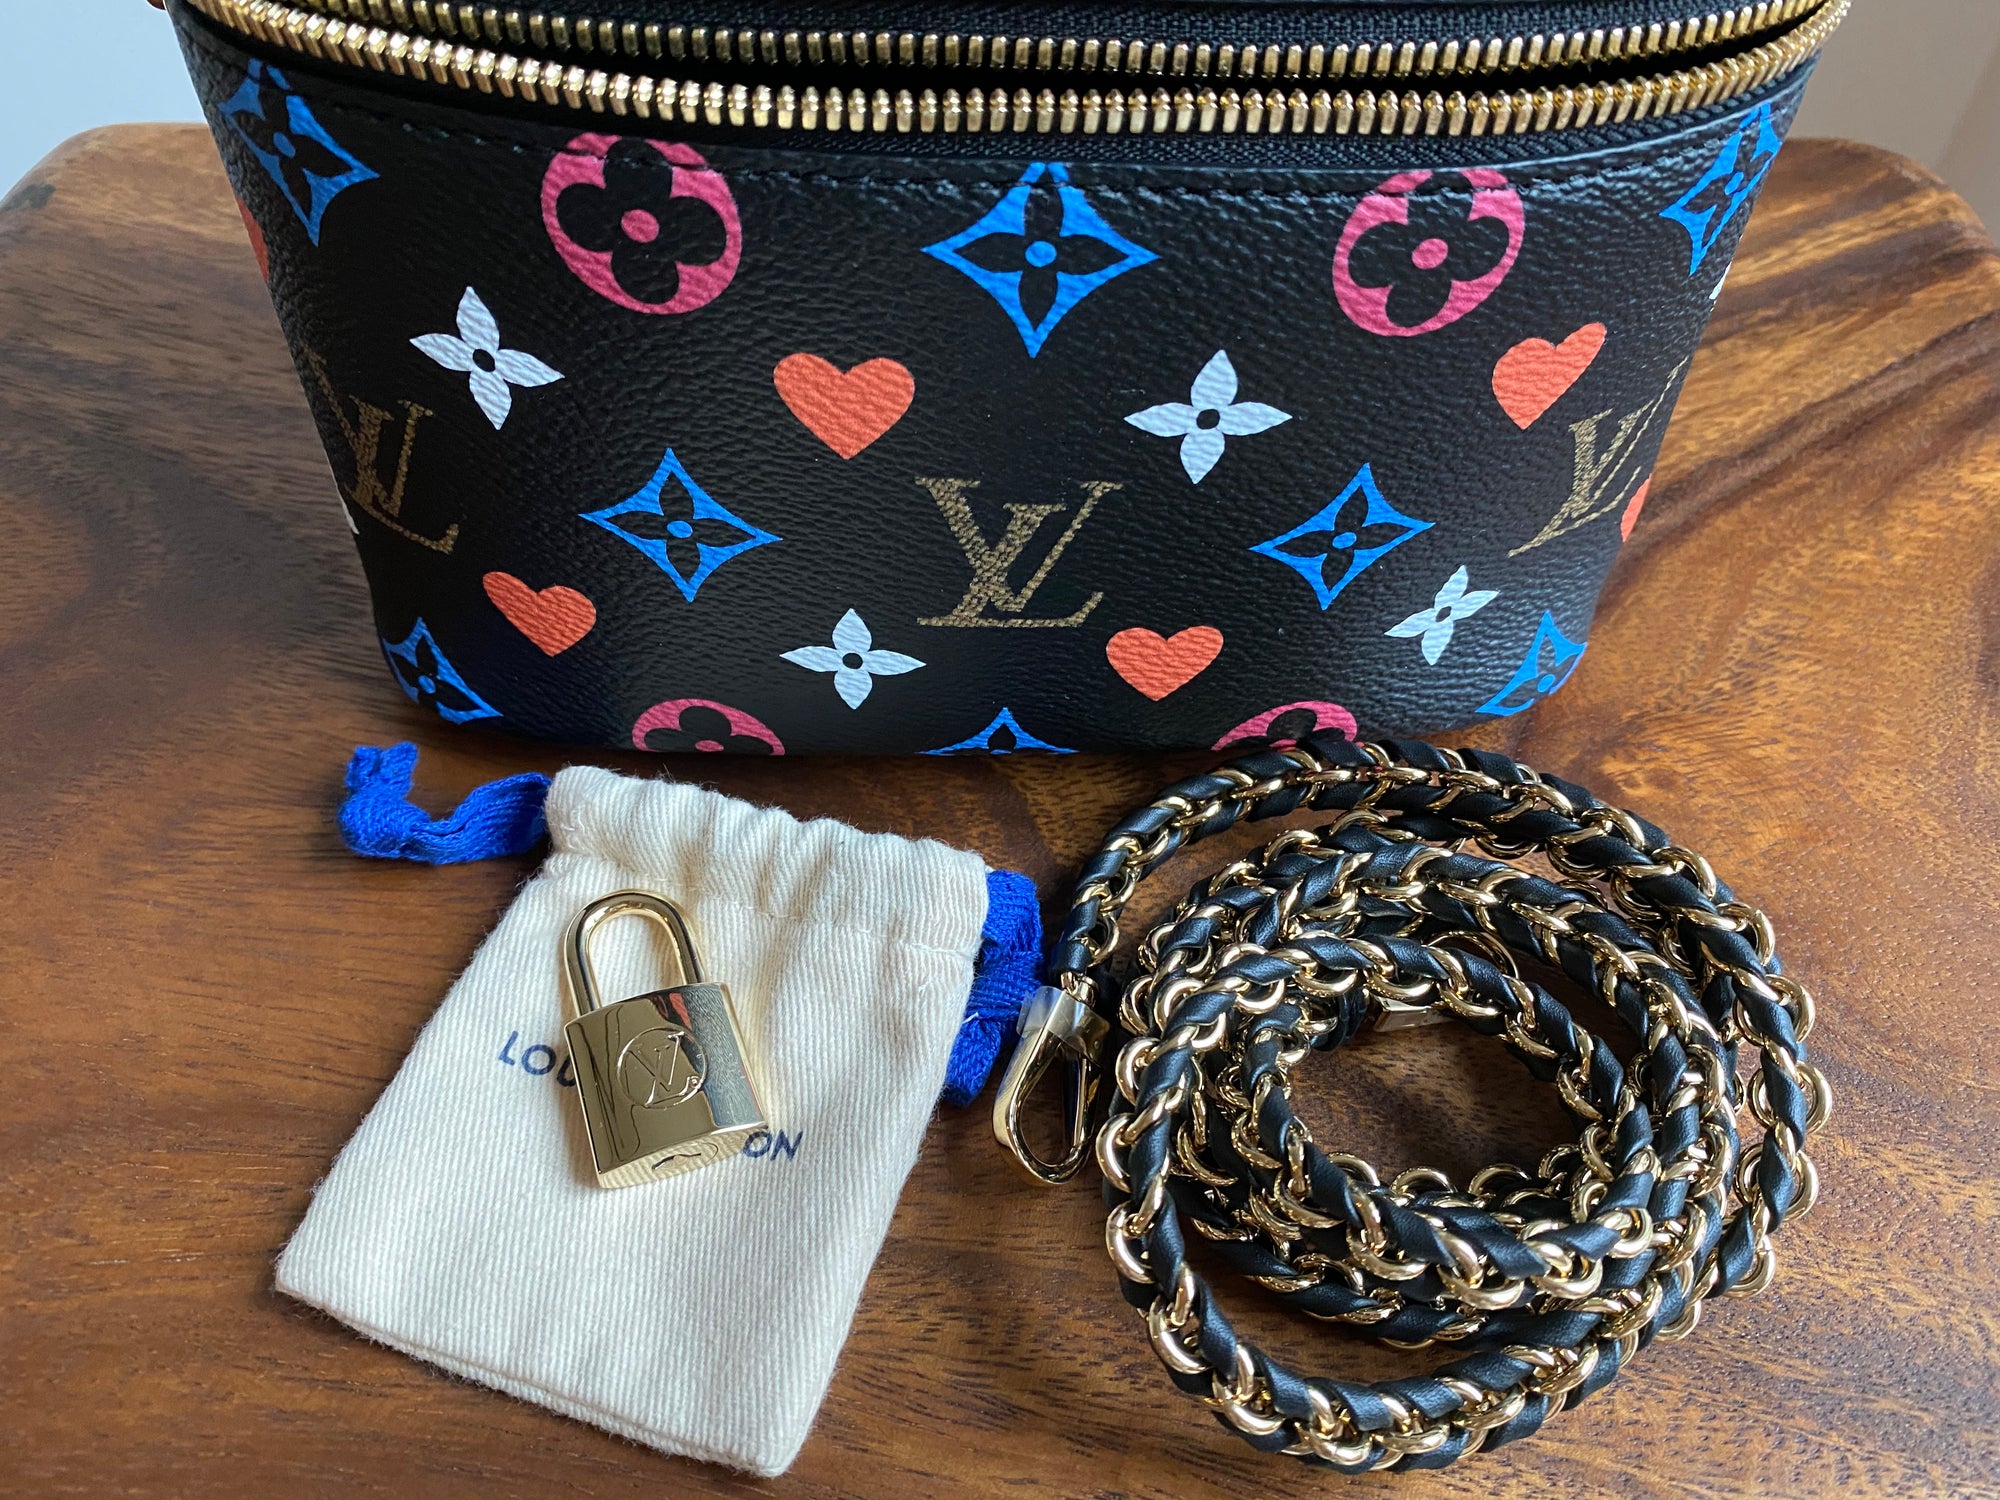 NEW Louis Vuitton Game on Vanity PM small Black Multicolor bag w